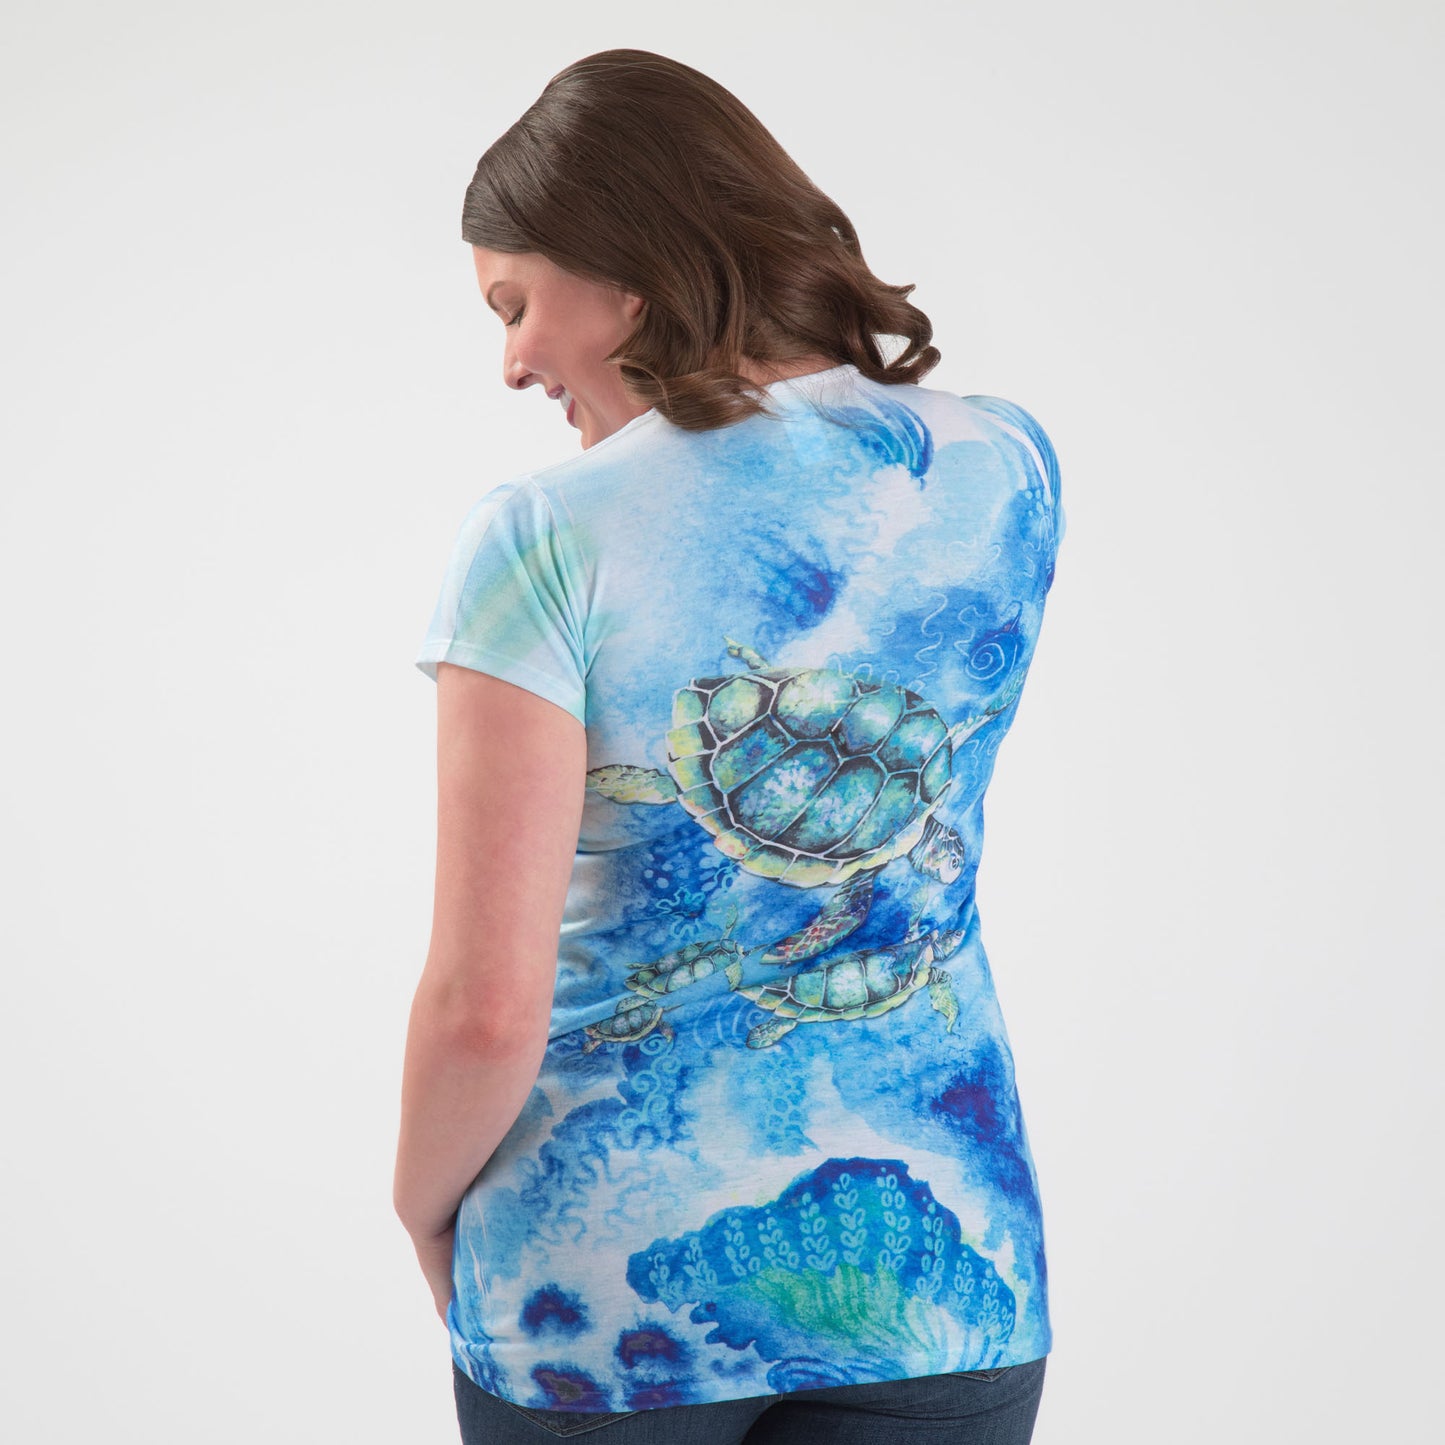 Diving Turtles Sublimation Tee